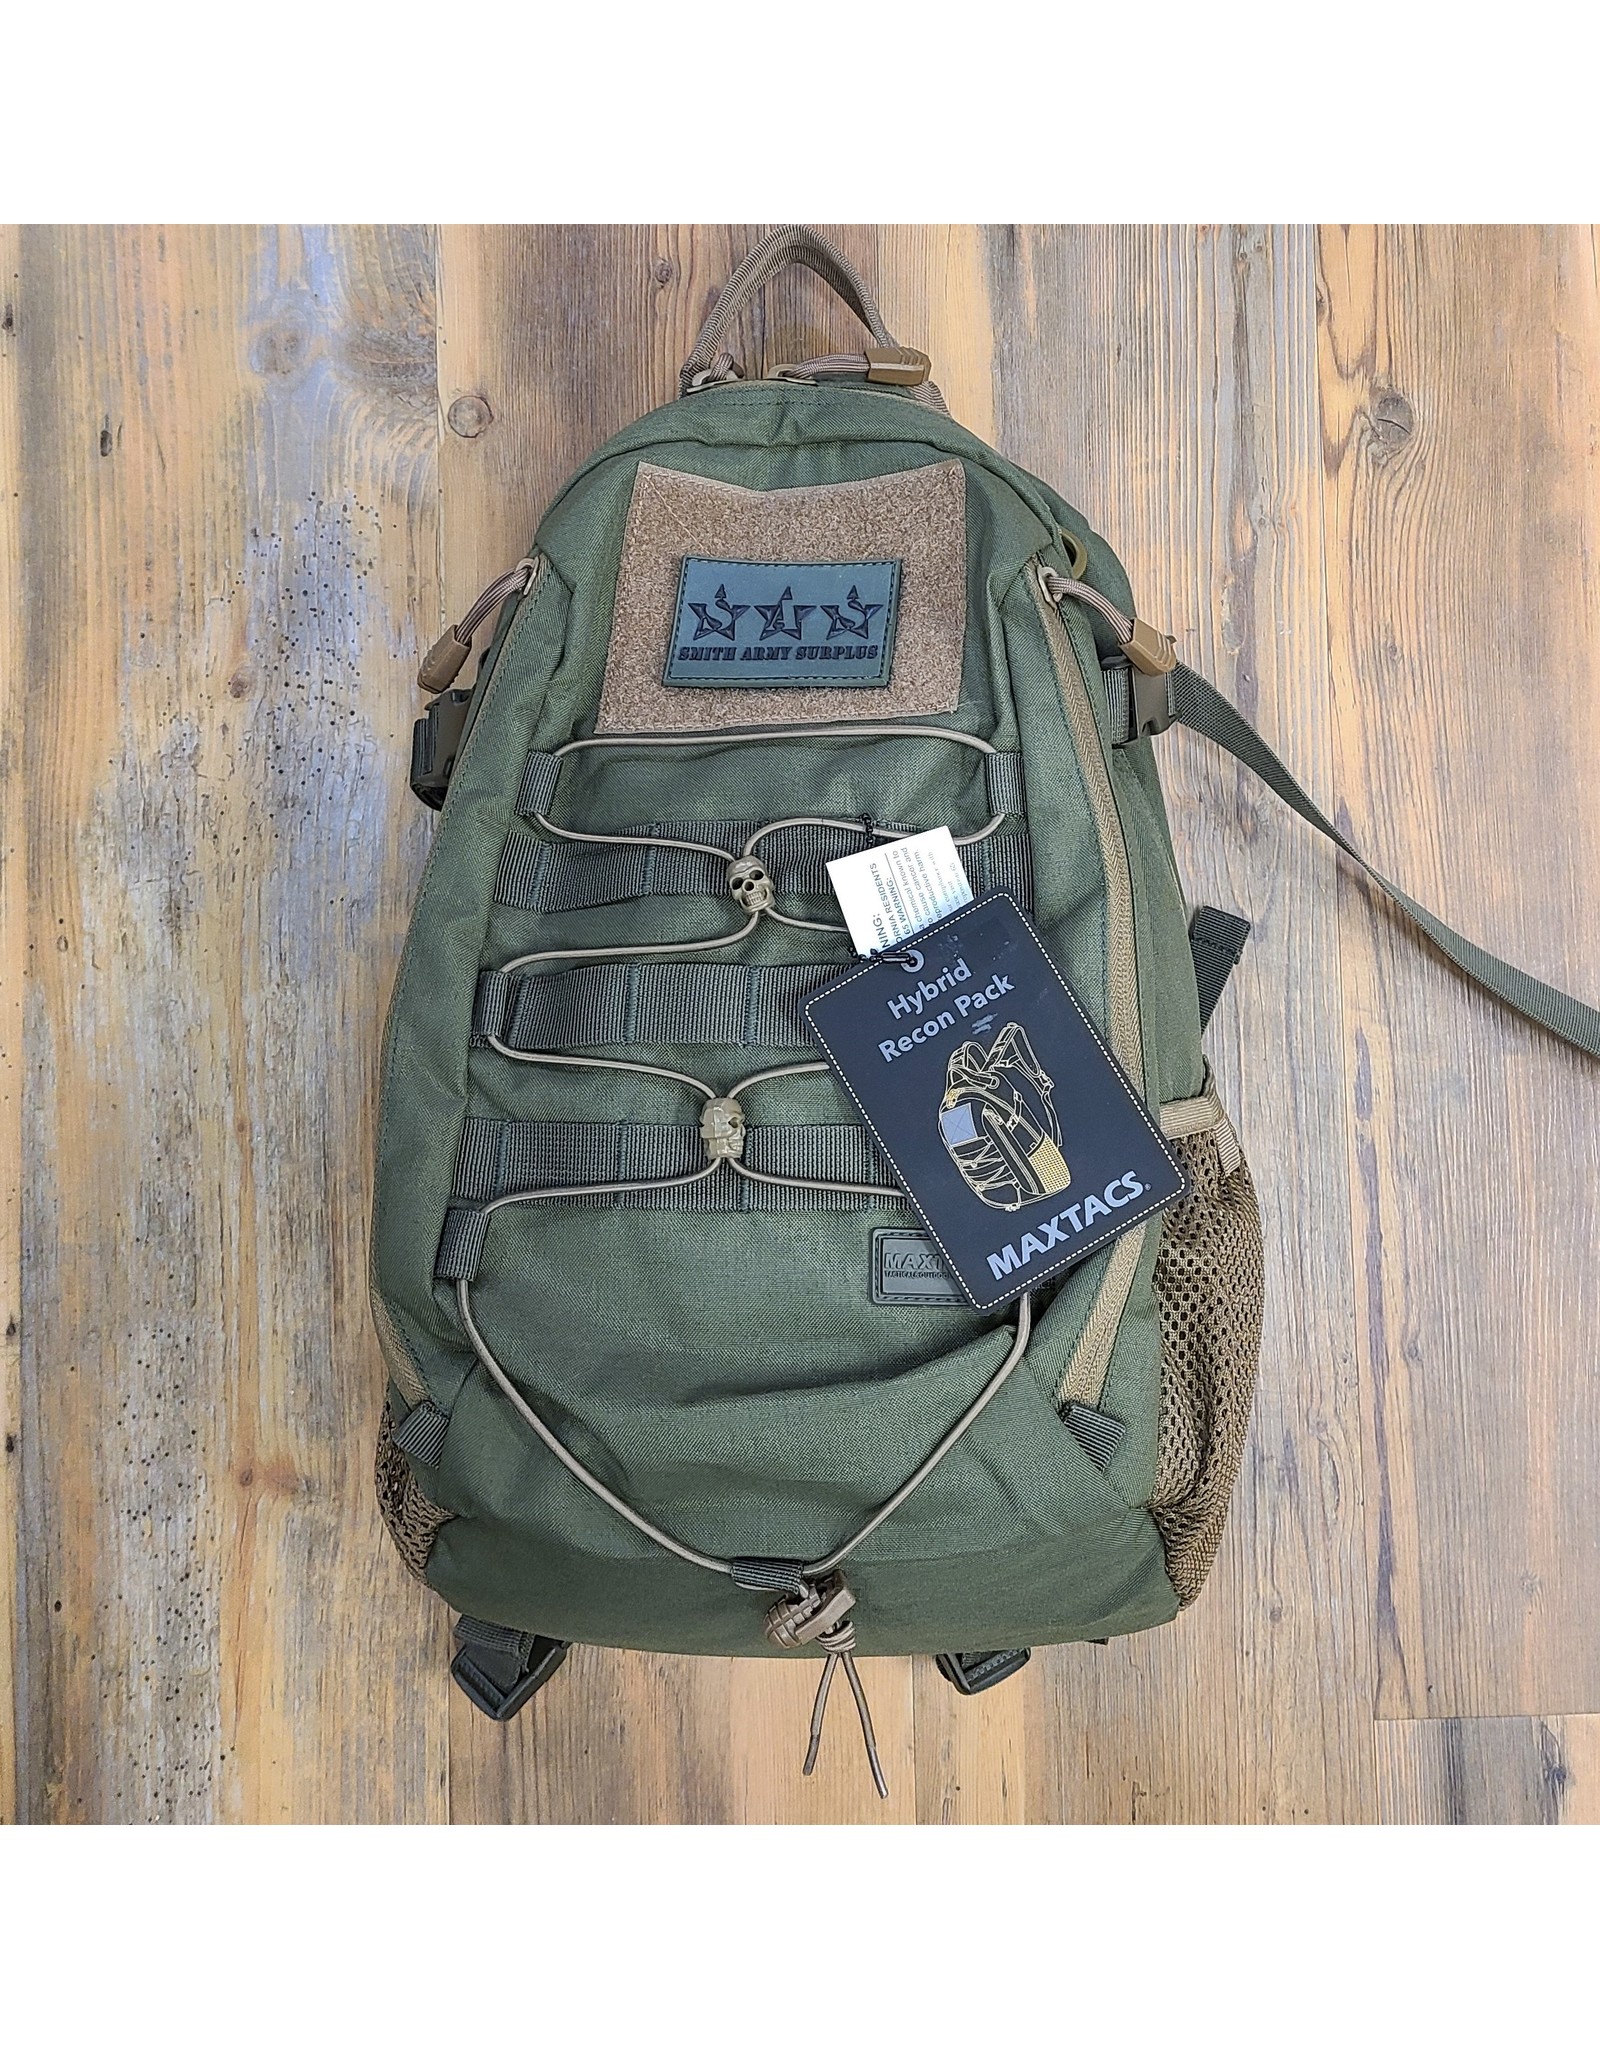 MAXTACS MAXTAC HYBRID RECON PACK OLG/DCY